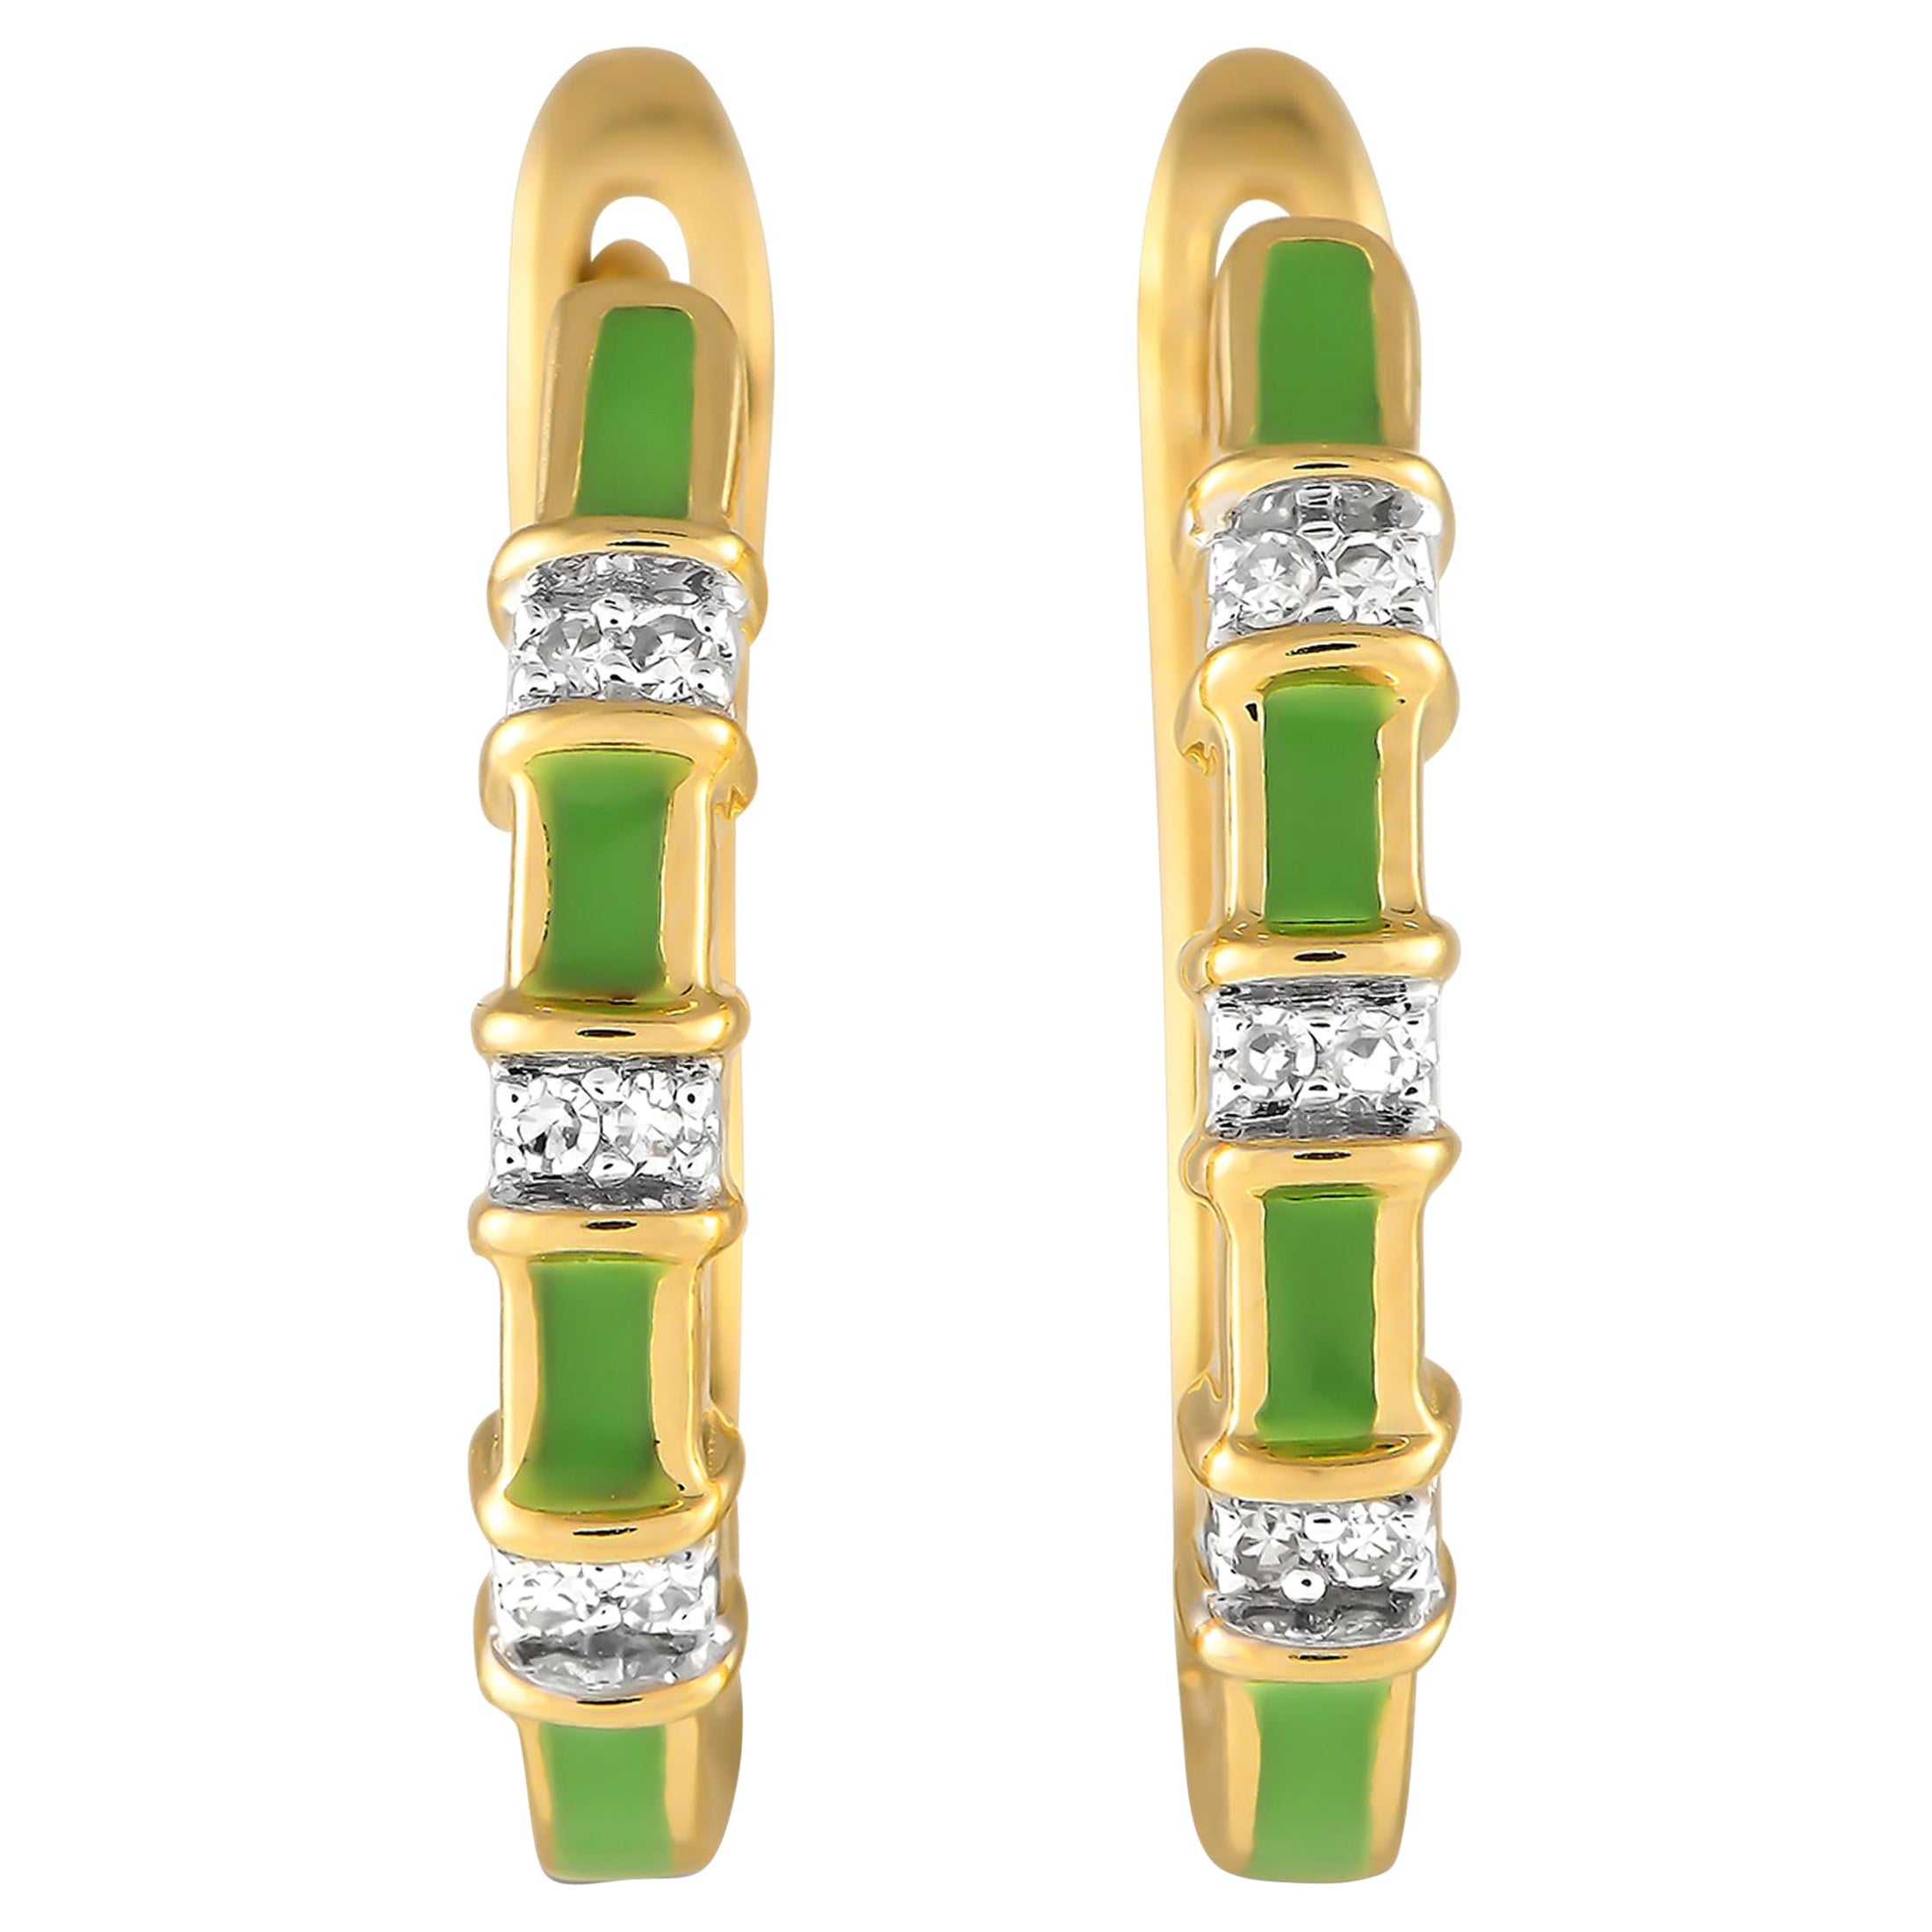 LB Exclusive 14K Yellow Gold 0.05ct Diamond and Enamel Huggie Earrings ER28196 For Sale